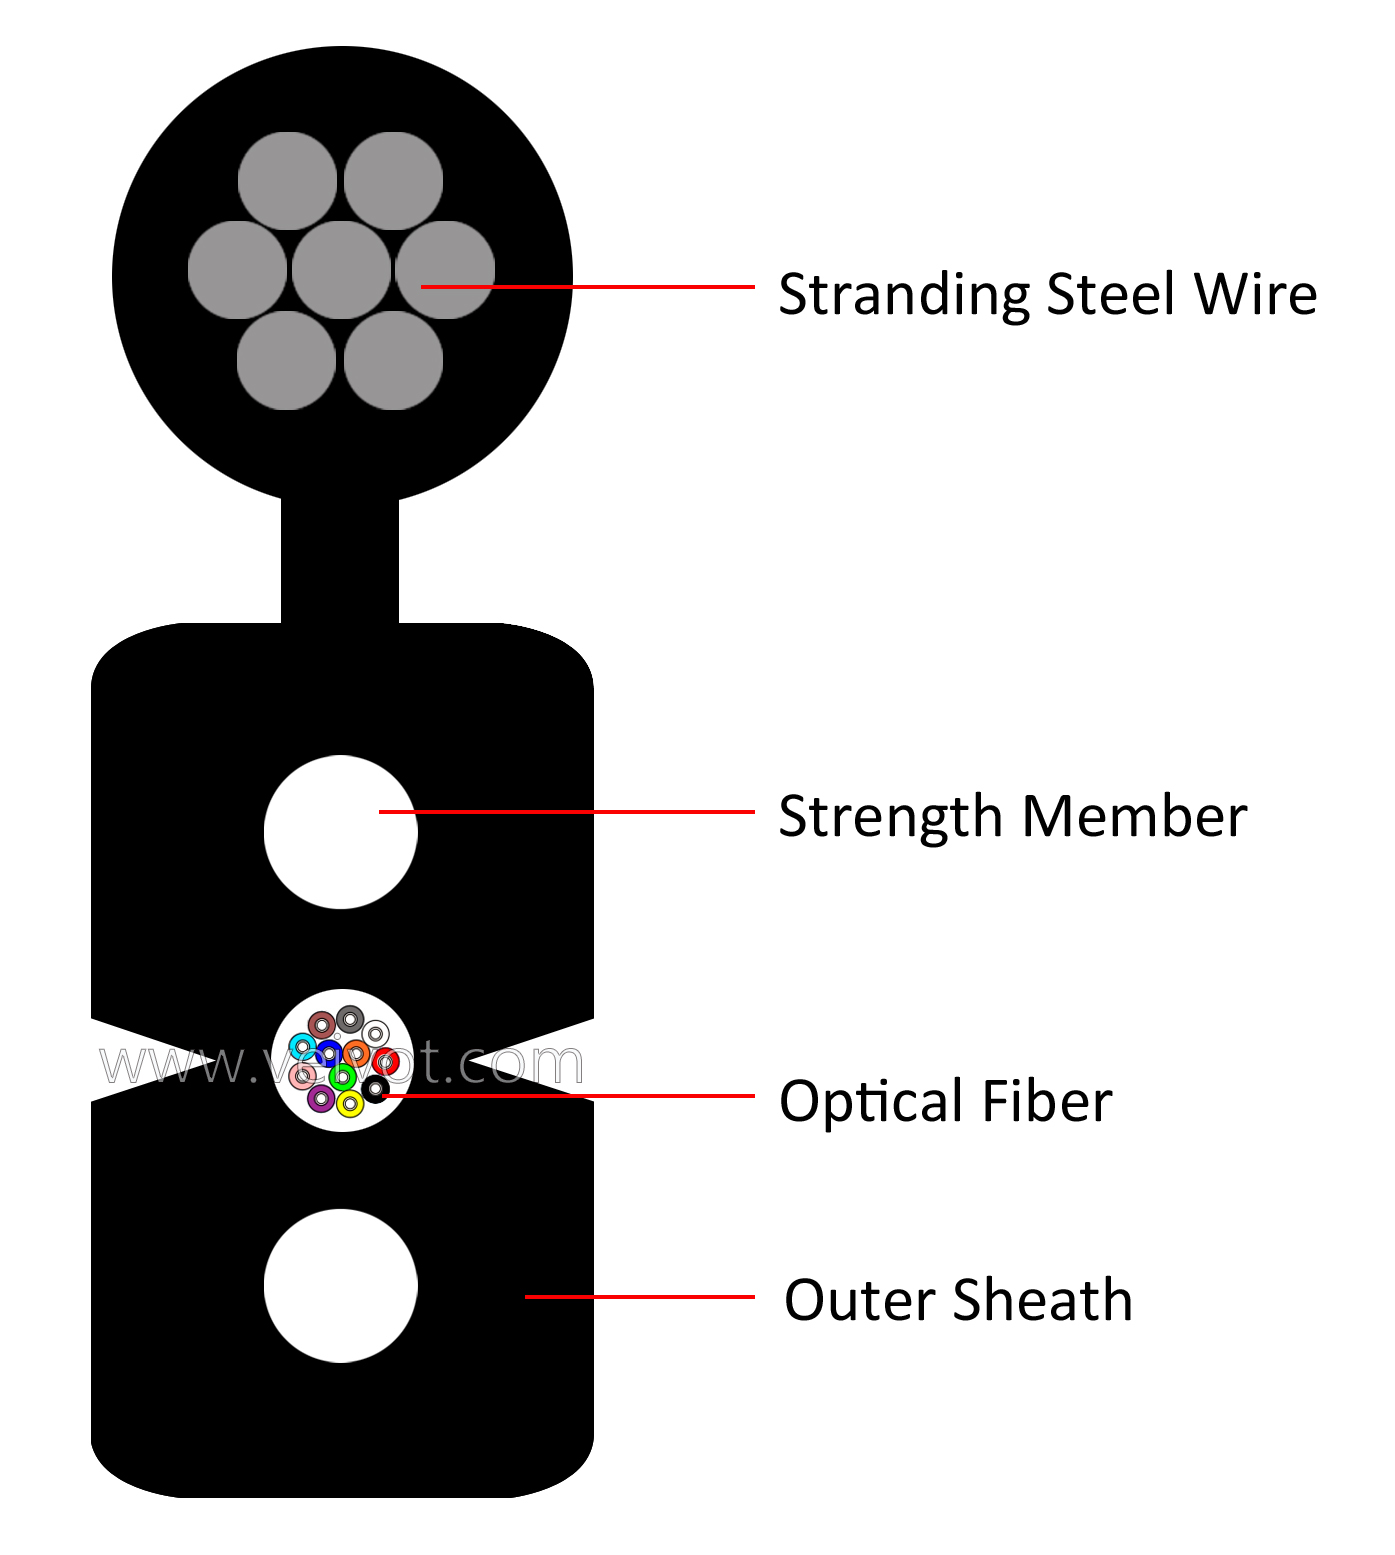 GJYX(F)CH 1-12C Flat Drop Cable 7 stranding steel wire - Veivot,GJYXFCH 1-12C Flat Drop Cable 7 twisted steel wire - Veivot